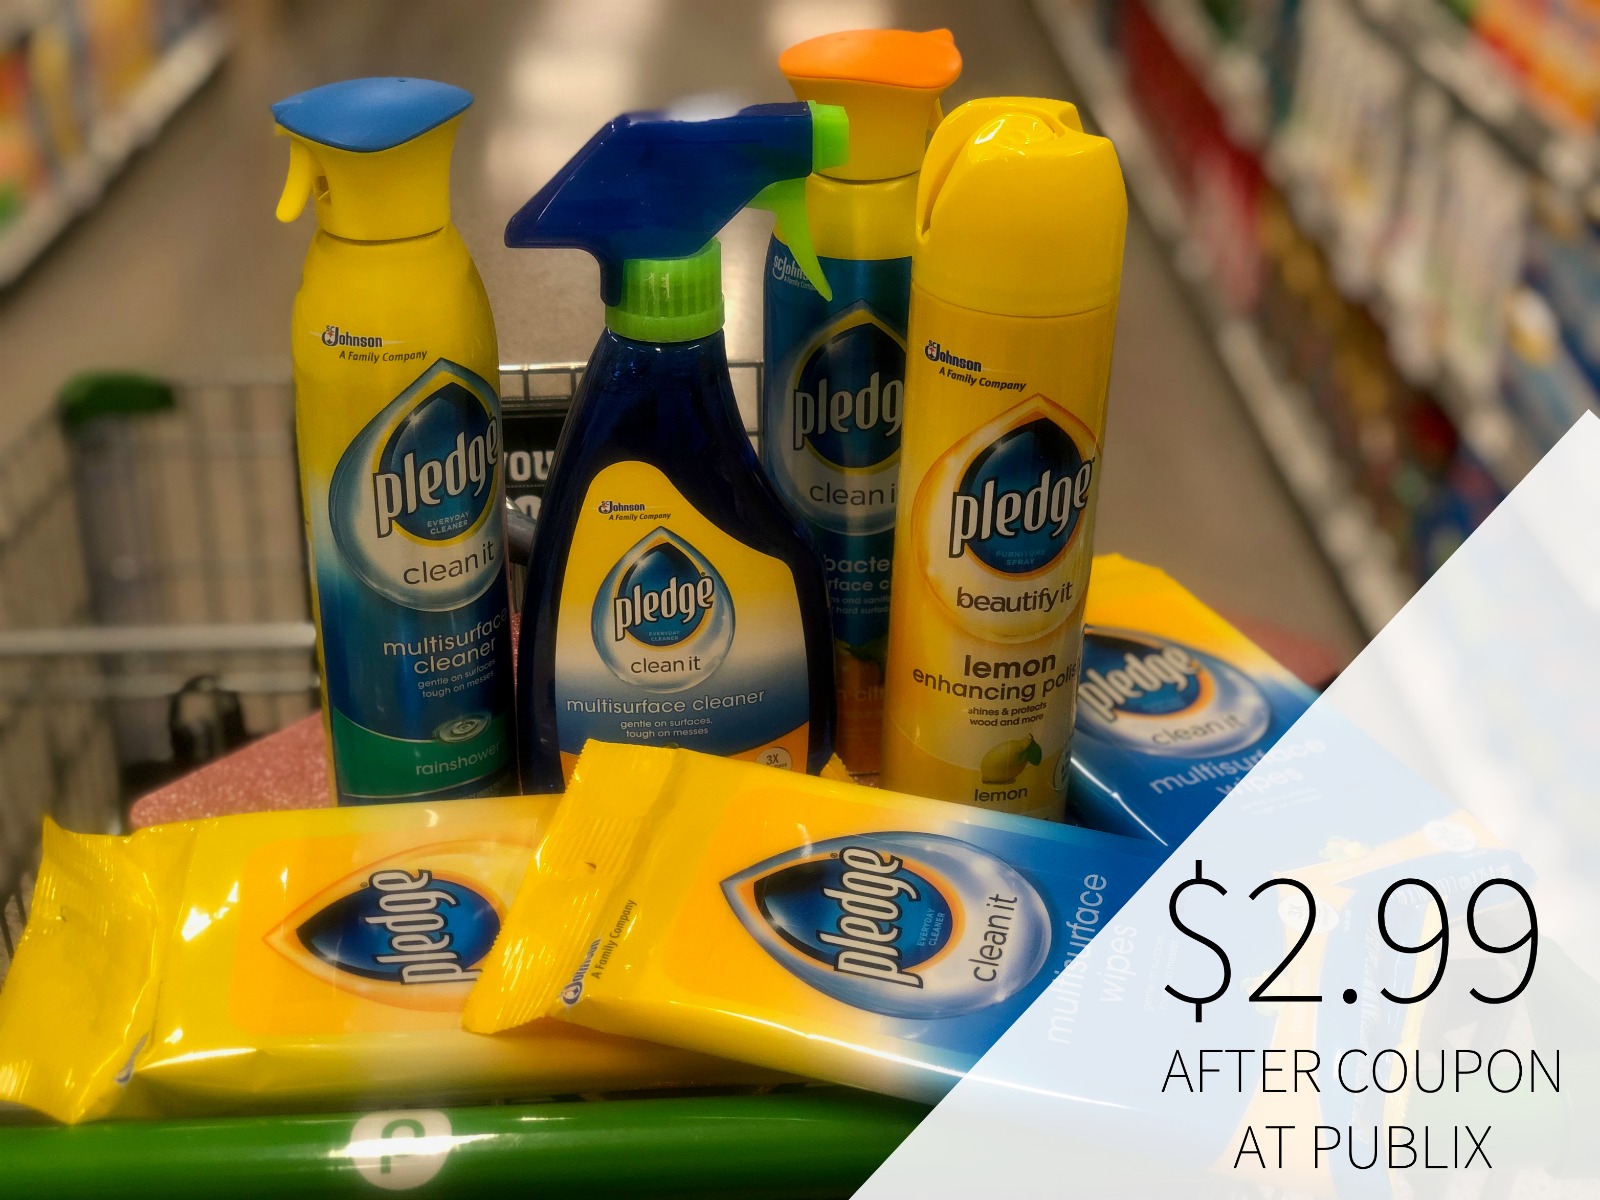 Super Deal on Pledge® Products Available Now at Publix on I Heart Publix 1